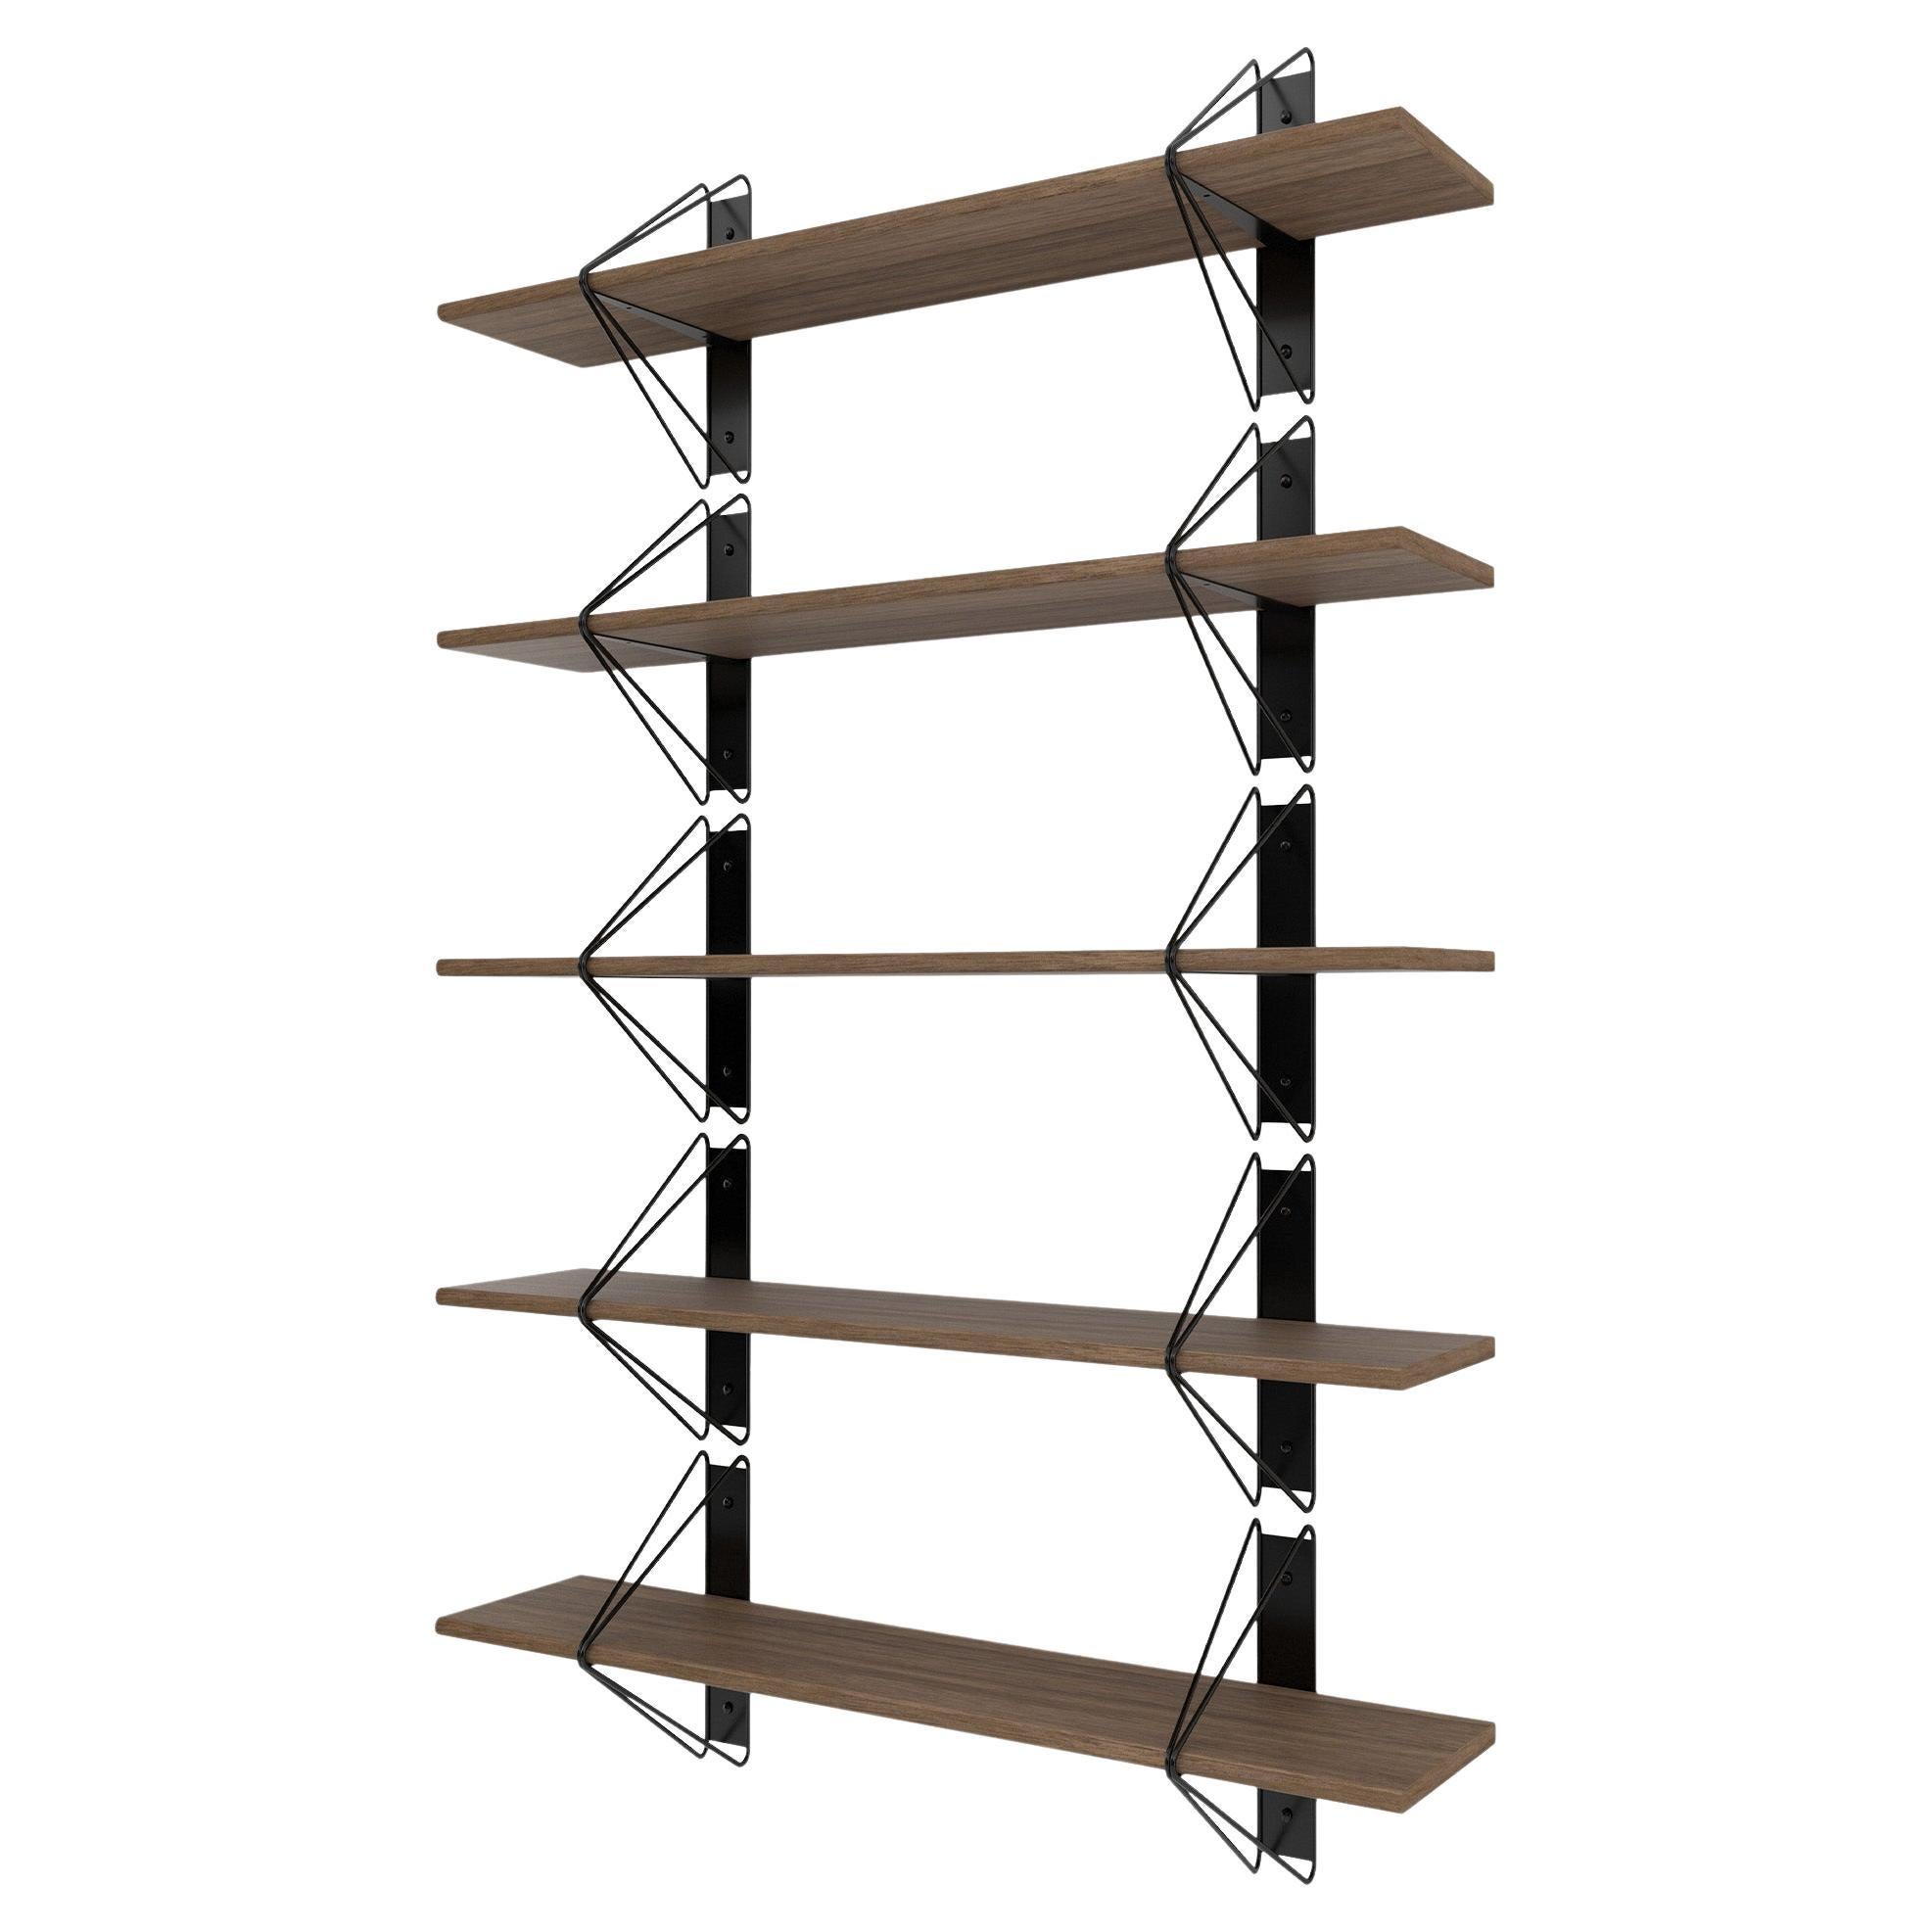 Set of 5 Strut Shelves from Souda, Black and Walnut, Made to Order For Sale